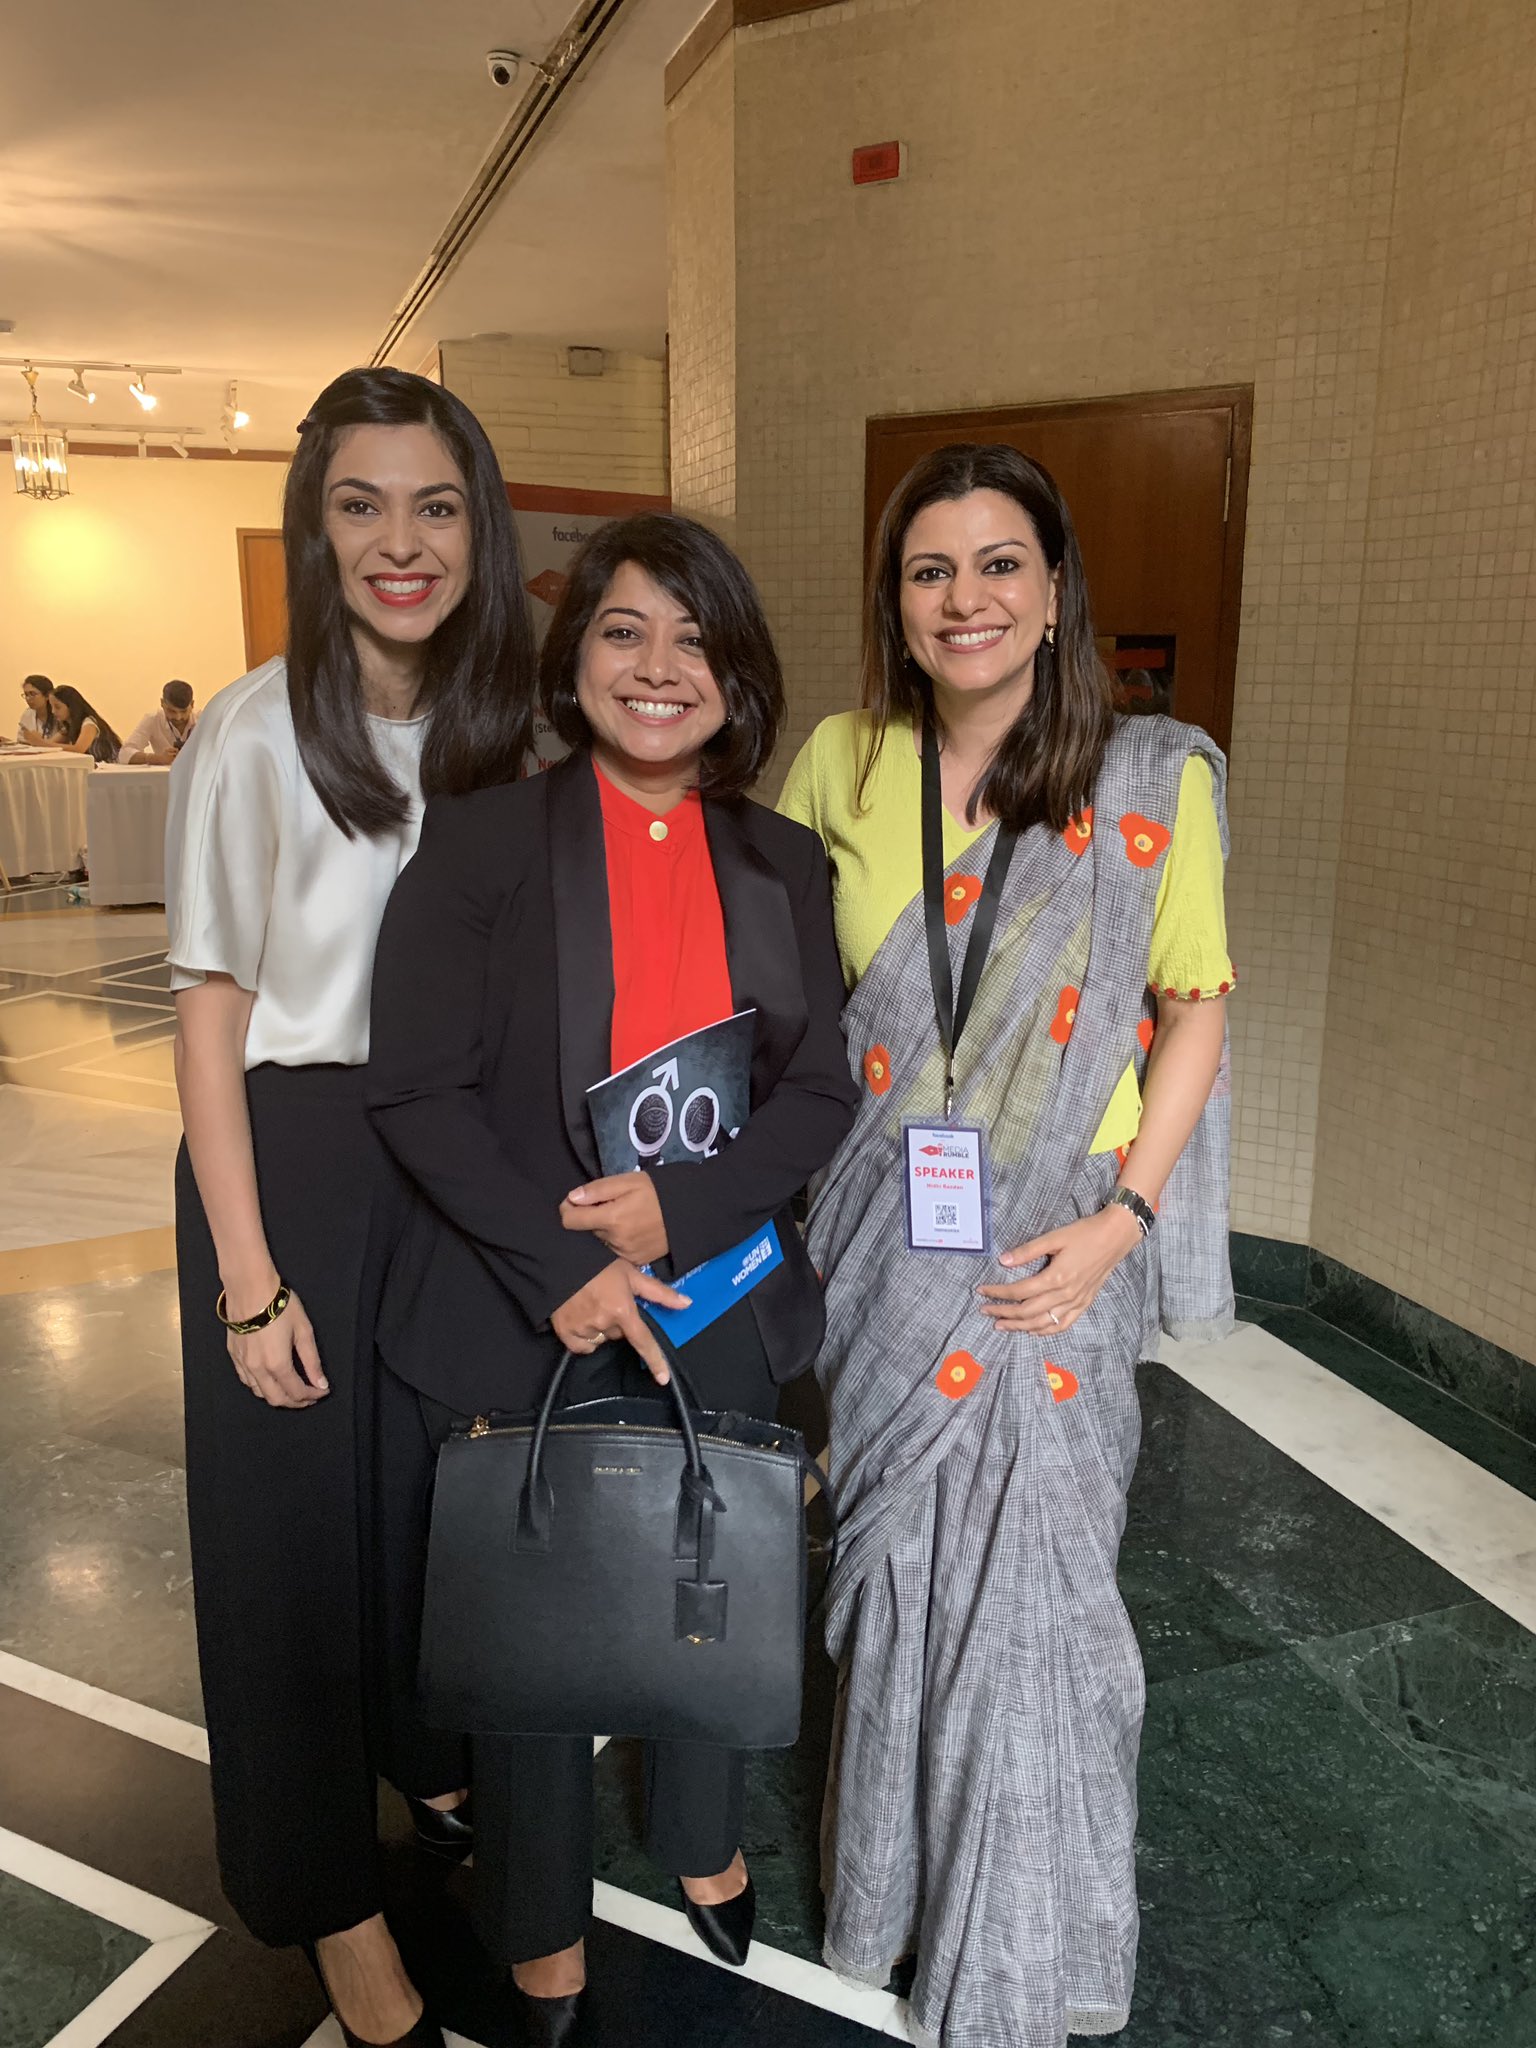 Nidhi Razdan on Twitter: "With two colleagues I immensely admire  @fayedsouza and @ShereenBhan #MediaRumble… "